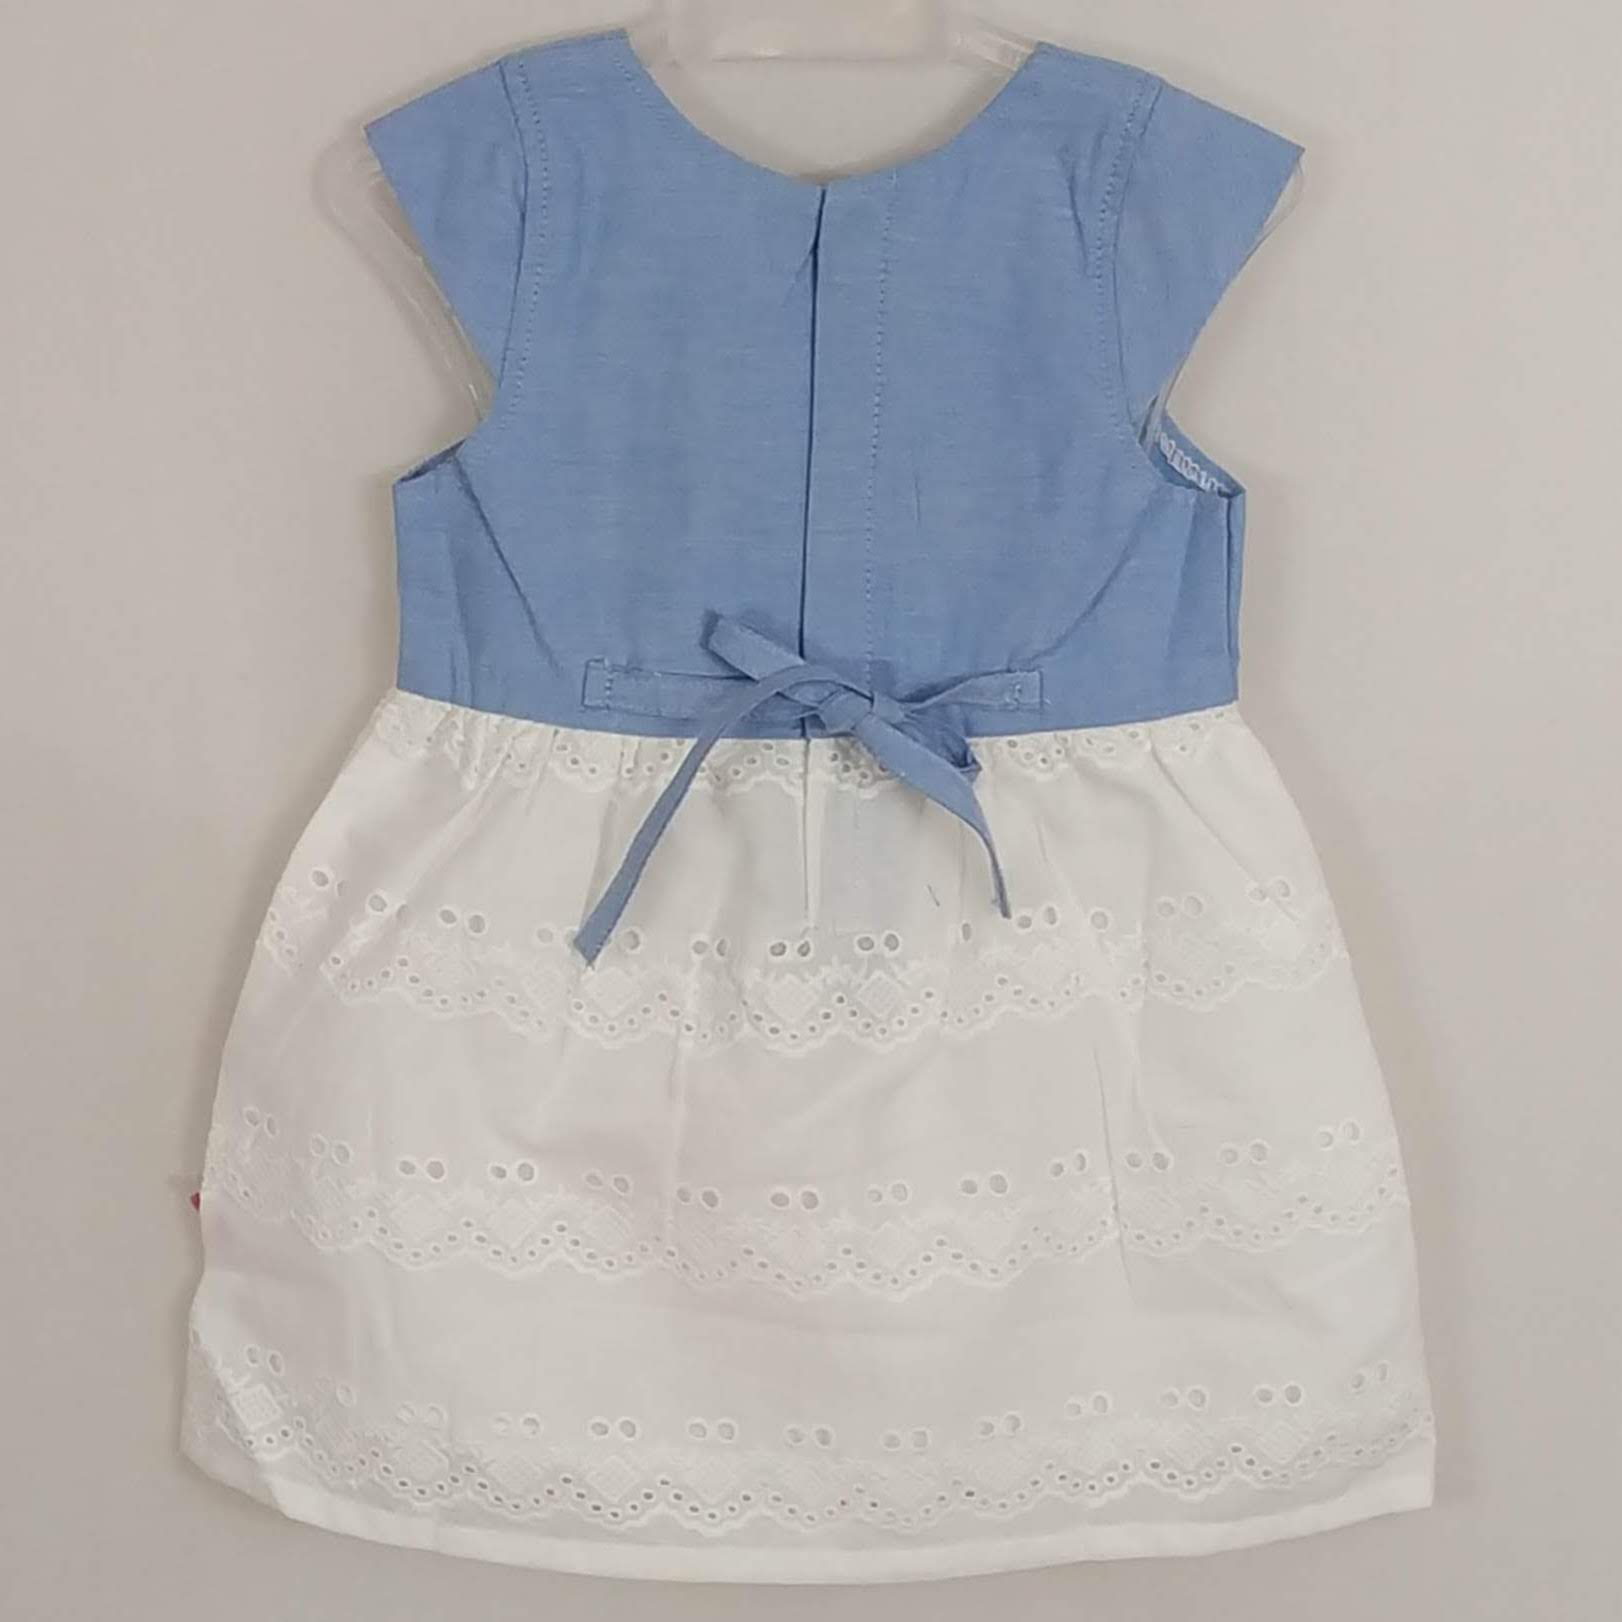 Buy Babyhug Denim Frock with Half Sleeves Inner Tee Solid Pink Blue for  Girls 45Years Online in India Shop at FirstCrycom  9901519